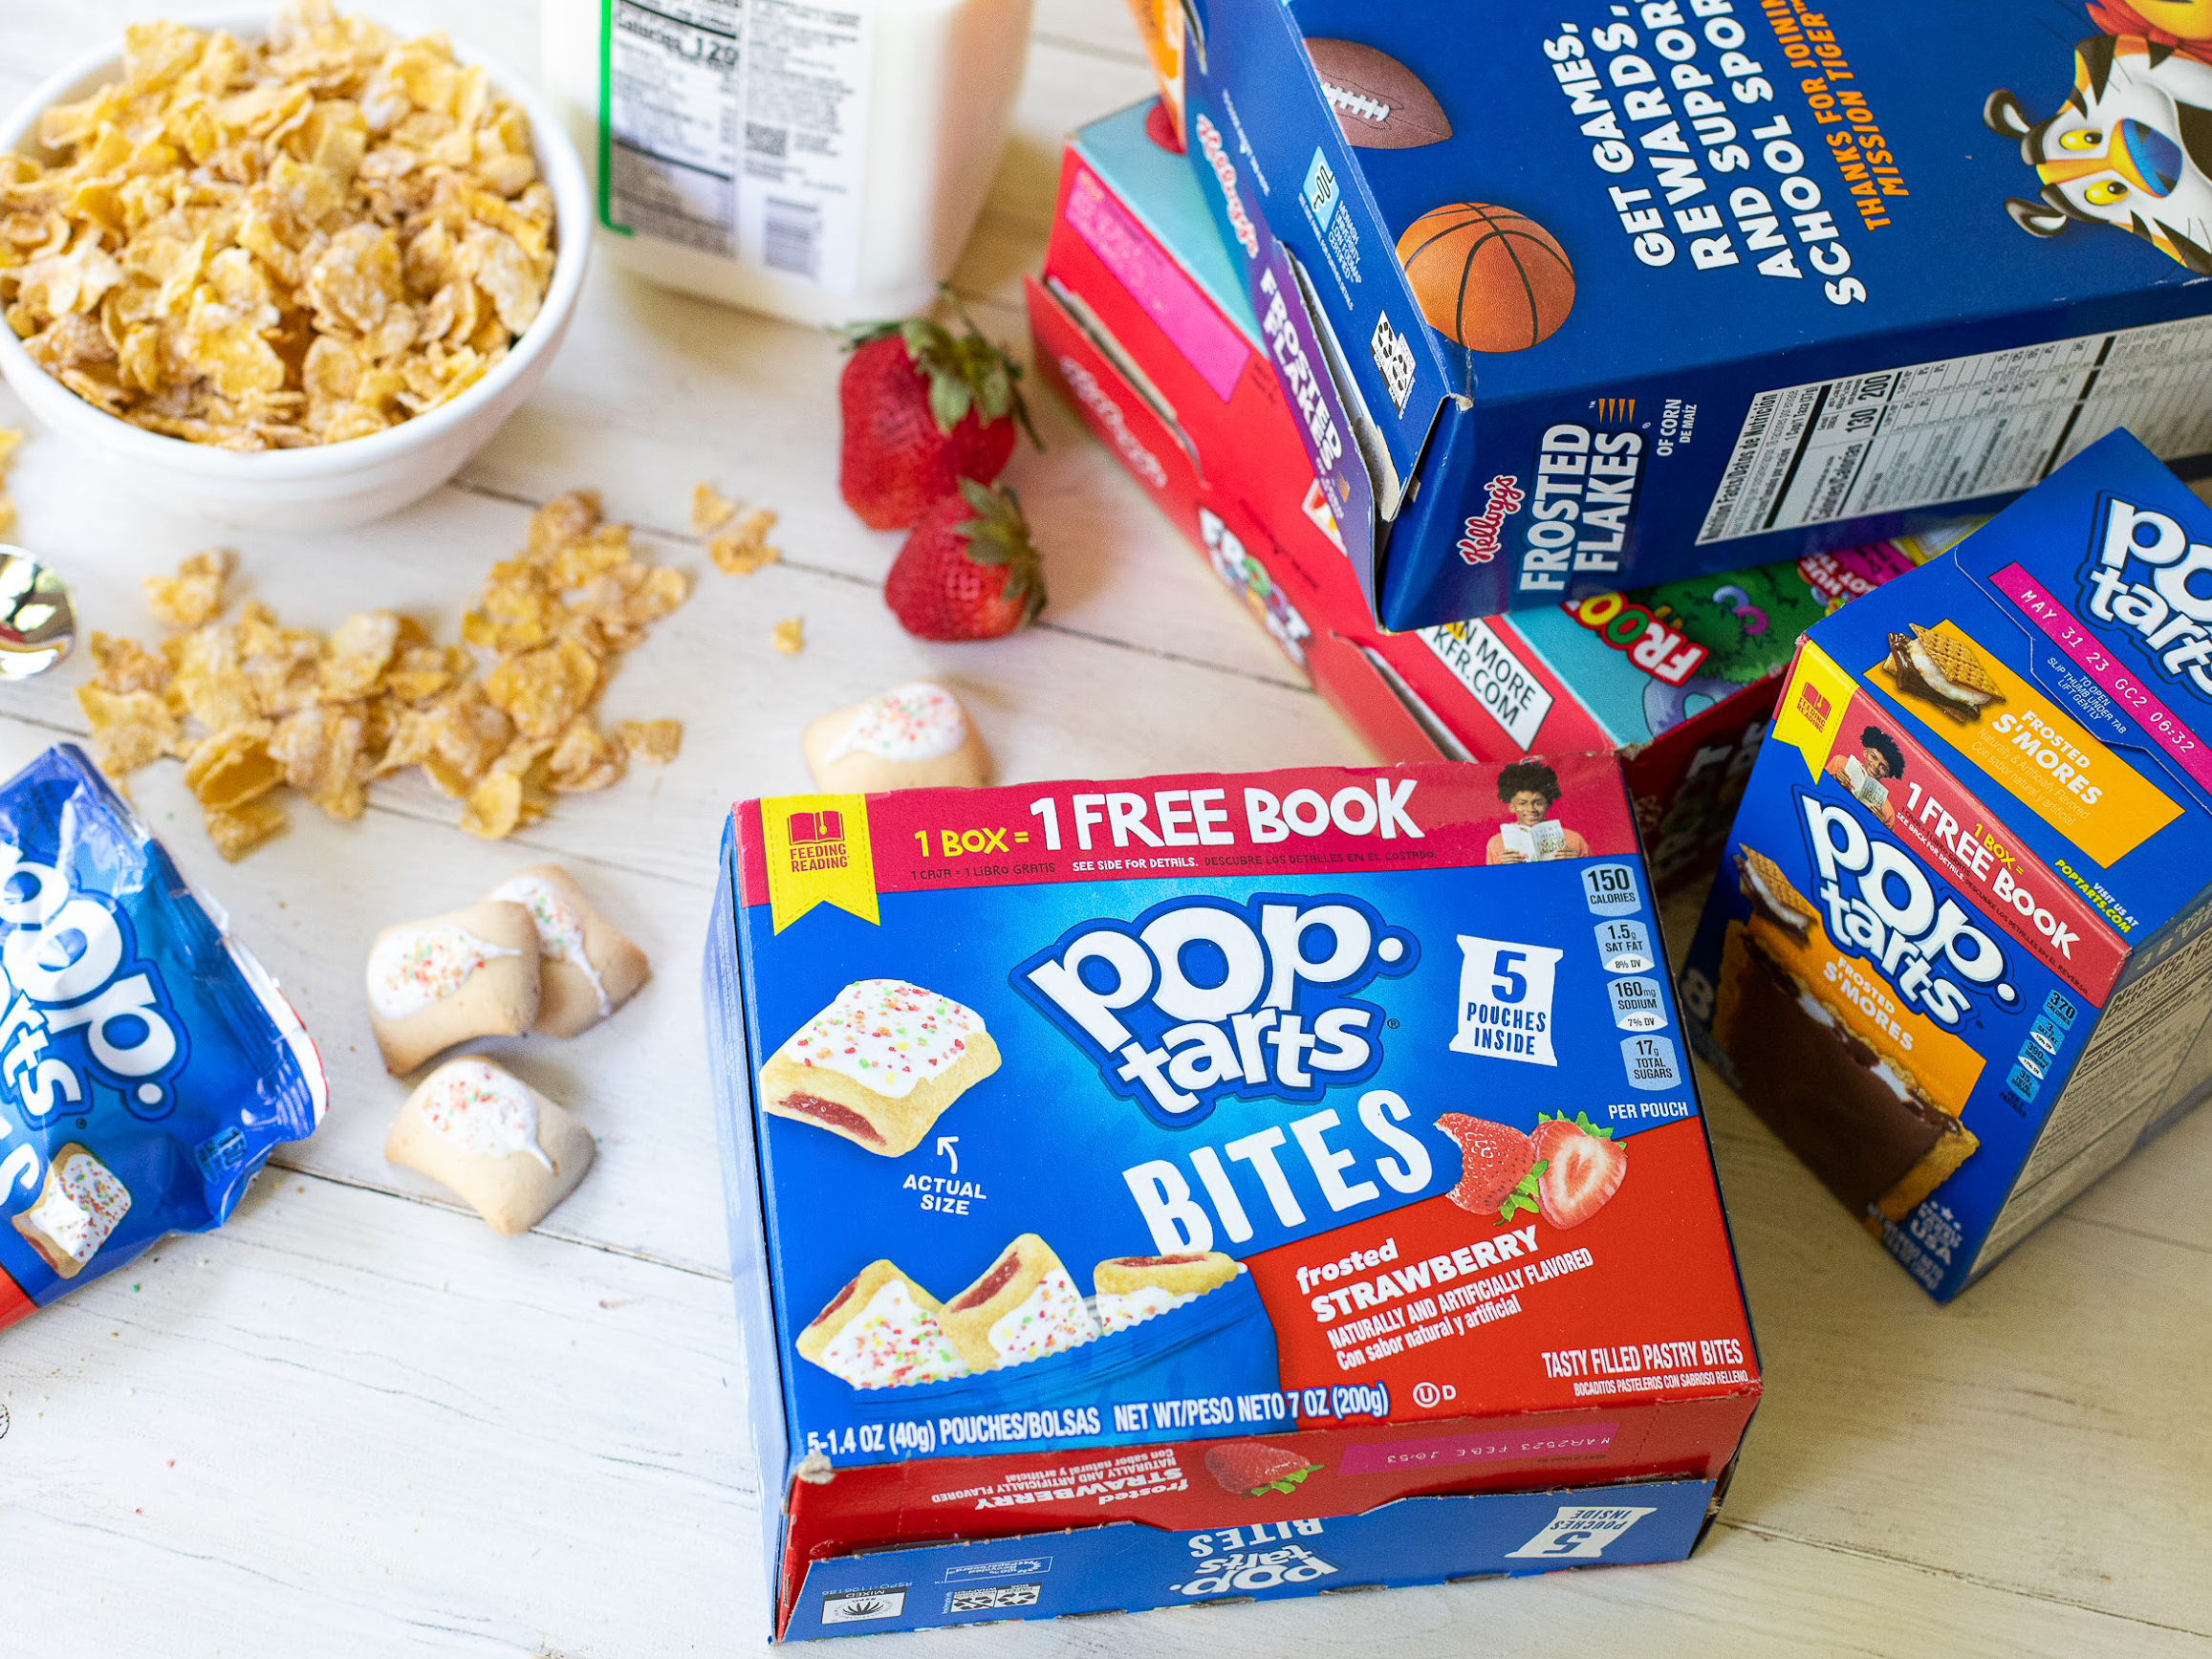 Kellogg's Pop-Tarts Pop-Tarts Bites Are BOGO This Week At Publix – The Boxes As Low As 93¢ - iHeartPublix